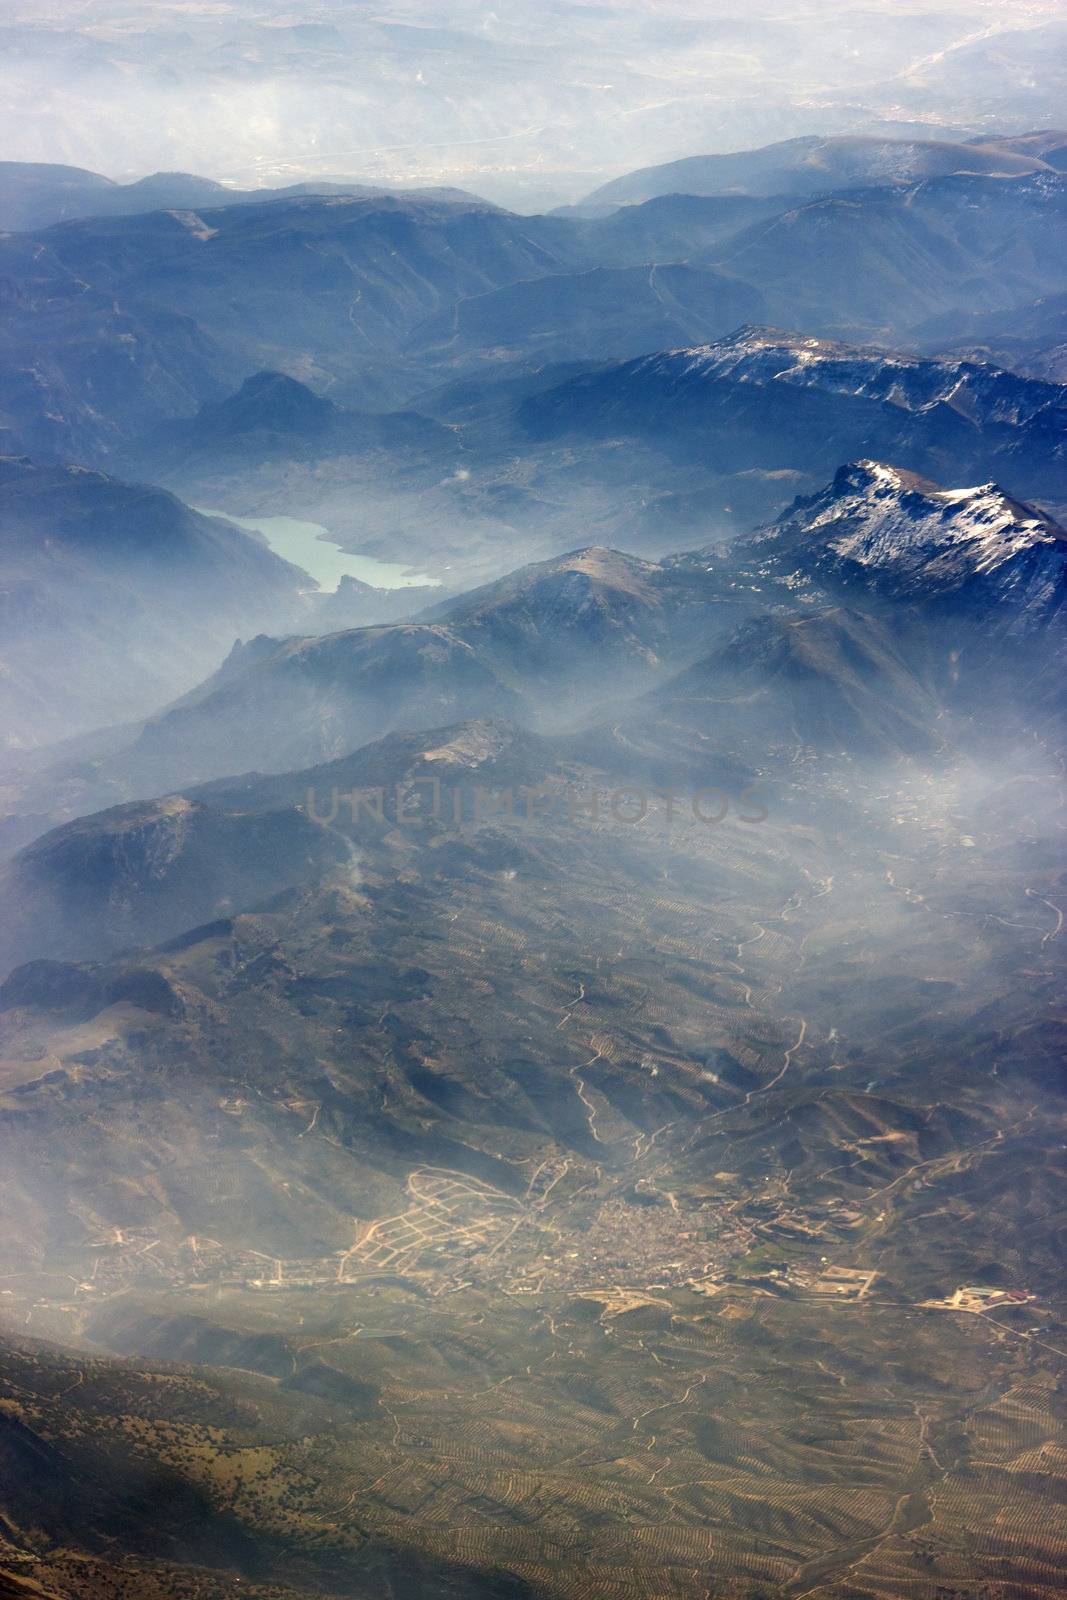 View from the plane over the Alps